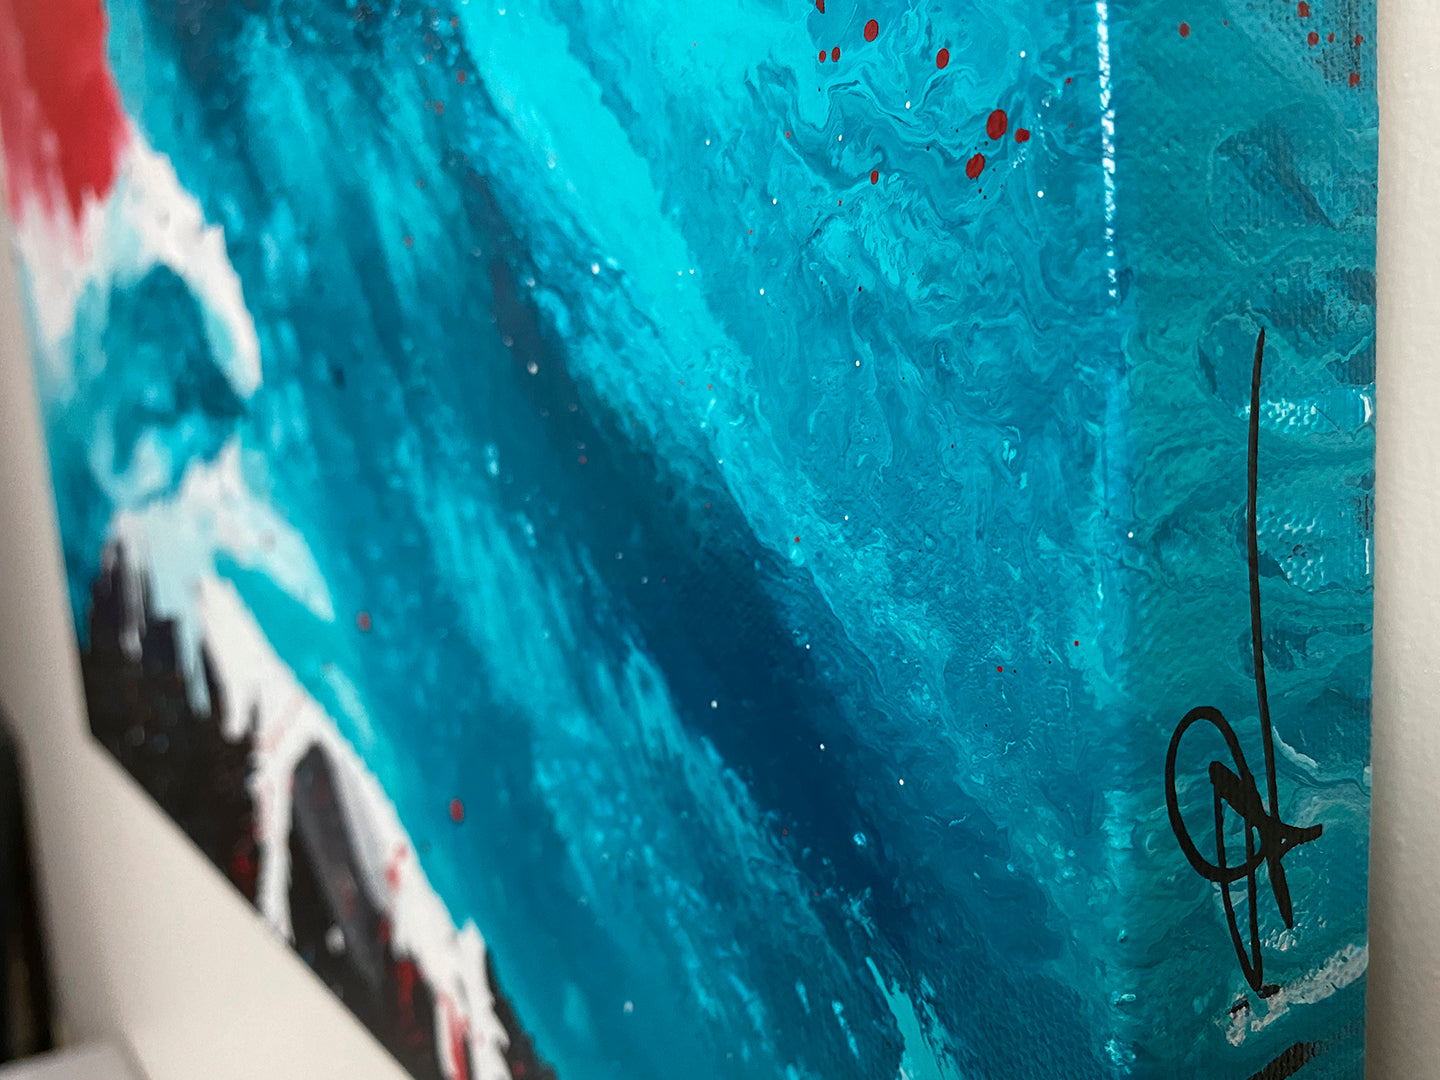 Abstract, expressionism, acrylic painting close-up showing signature on the canvas edge. Volatile interactions of black, dark blue, turquoise, bright red and white